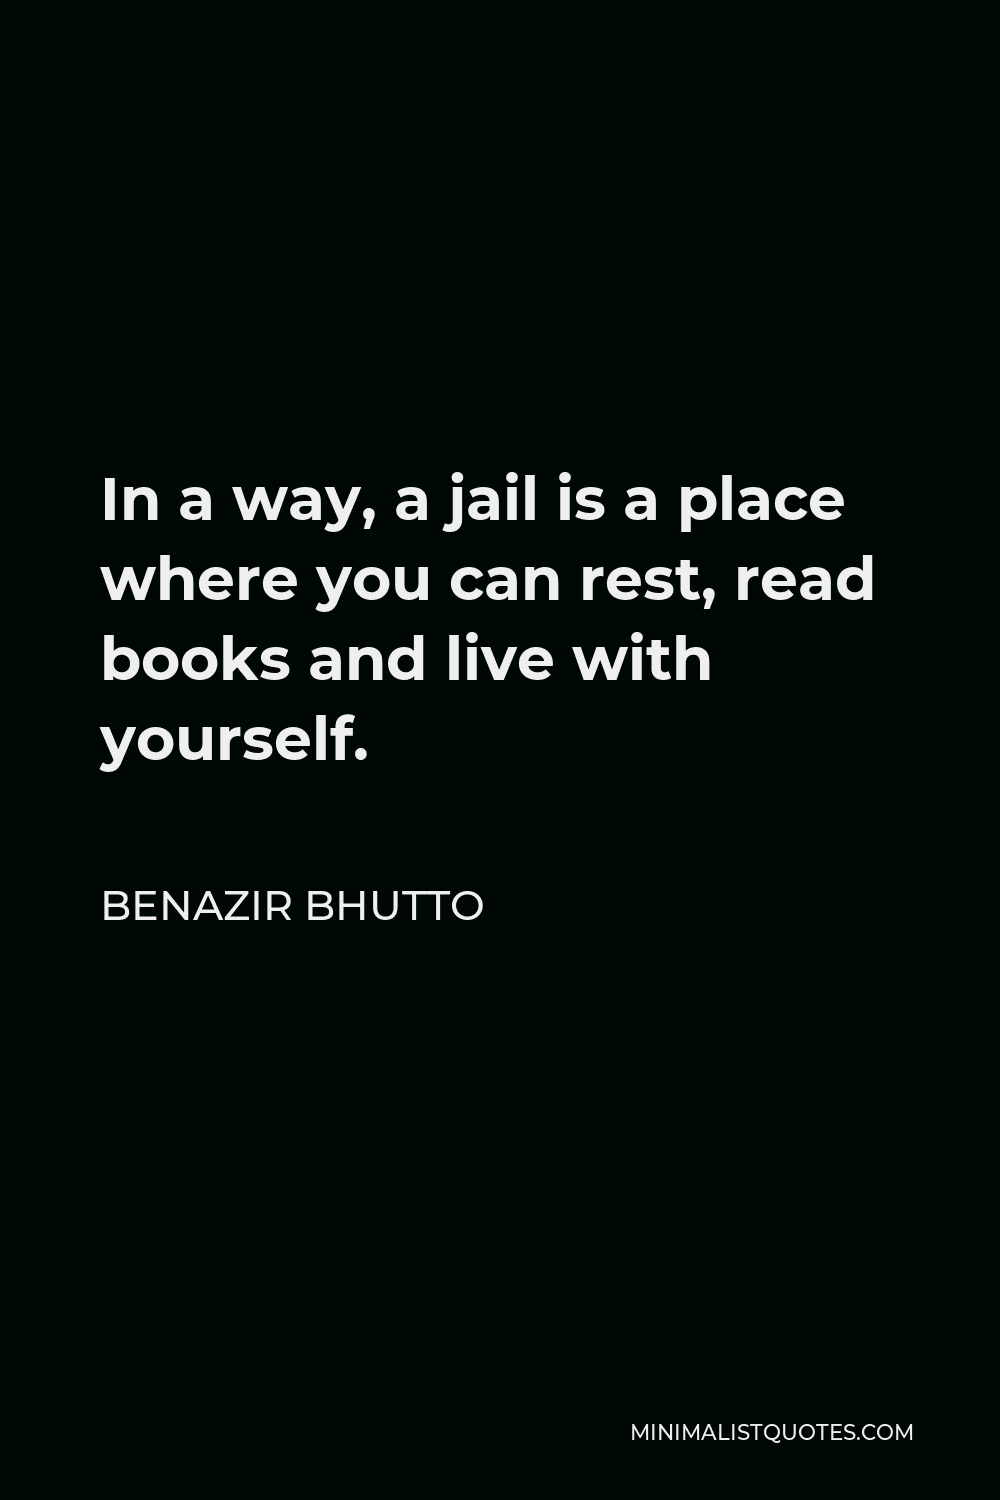 Benazir Bhutto Quote - In a way, a jail is a place where you can rest, read books and live with yourself.